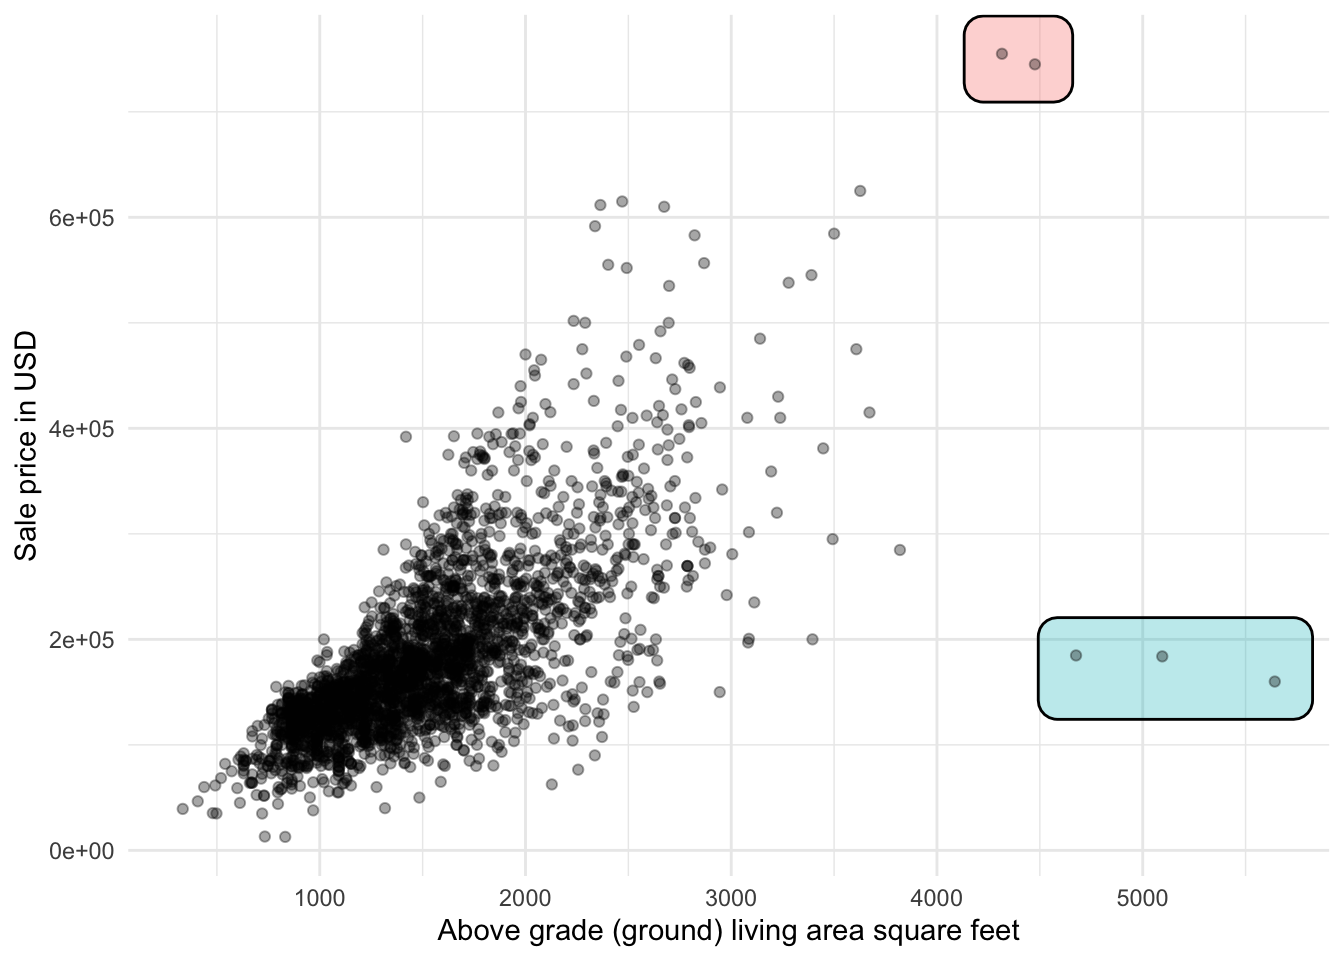 Scatter chart. Above grade (ground) living area square feet along the x-axis, Sale price in USD along the y-axis. The data forms a fairly dense cloud, with the majority of houses being below a diagonal. Two groups of points are away from the main cluster. 3 points have a higher living area than anything else, but quite low sale prices. The other group includes 2 points with a high living area and sale price.